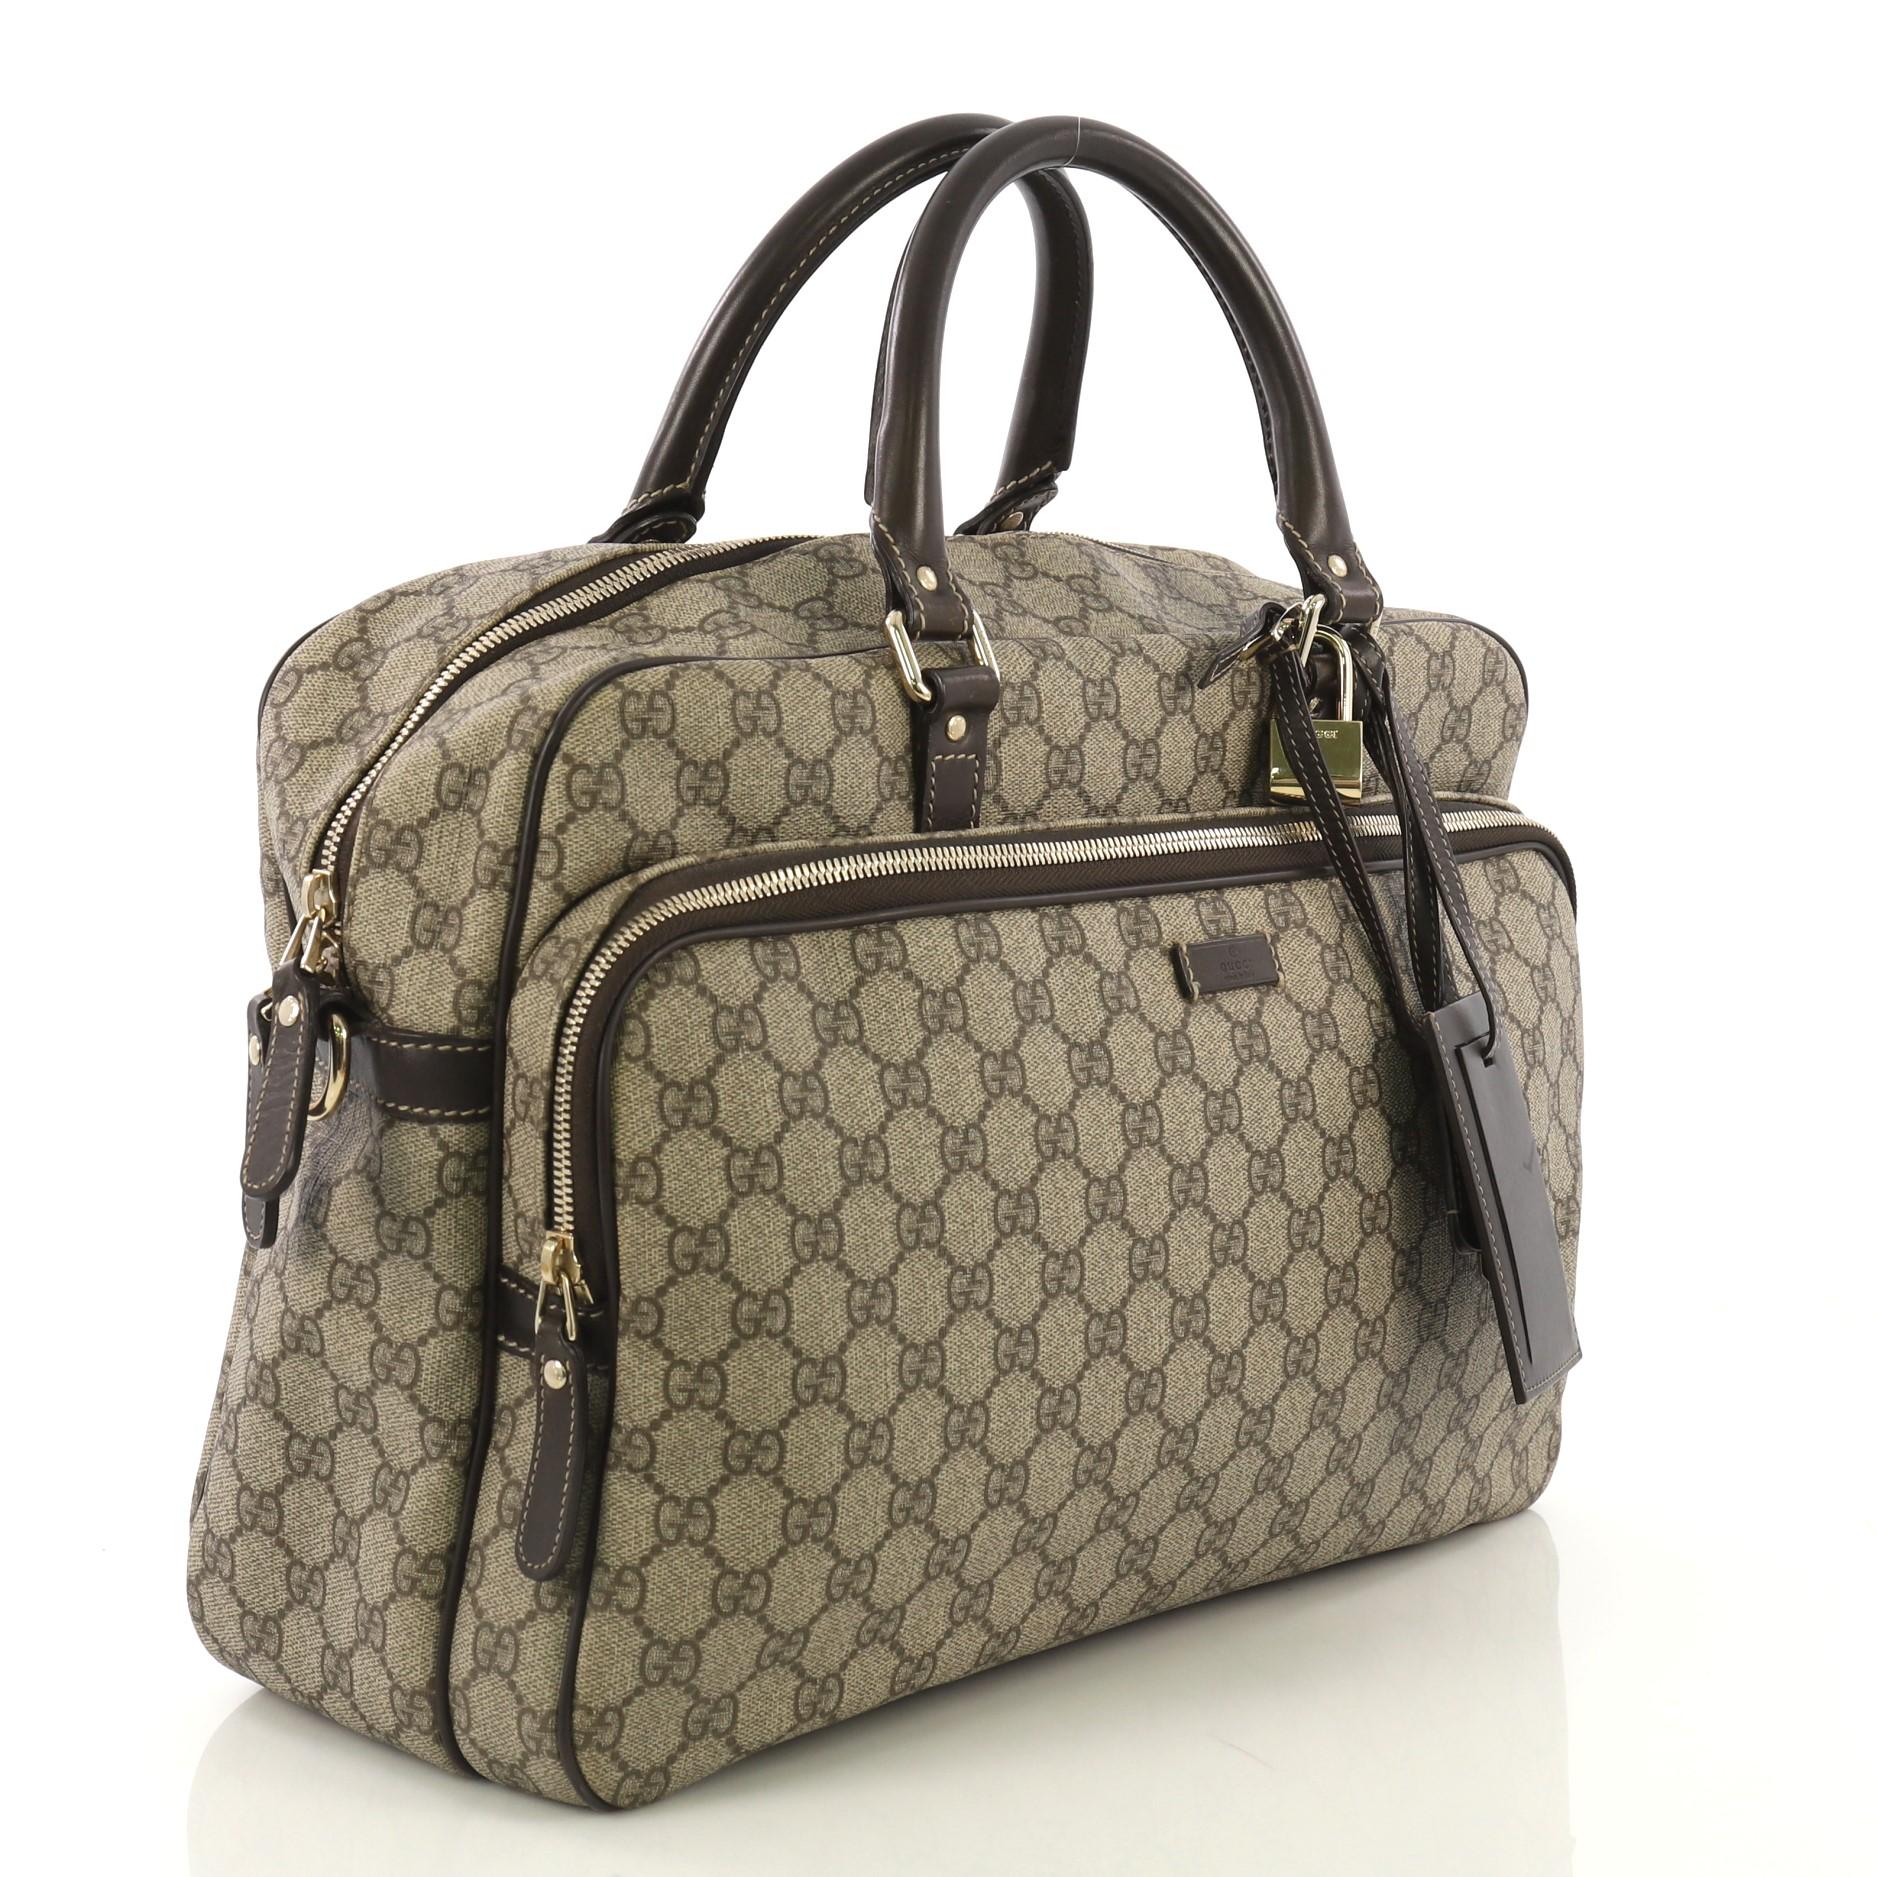 This Gucci Convertible Travel Bag GG Coated Canvas Medium, crafted from brown GG coated canvas and leather, features dual rolled leather handles, leather trim, exterior front zip pocket, and gold-tone hardware. Its zip closure opens to a brown